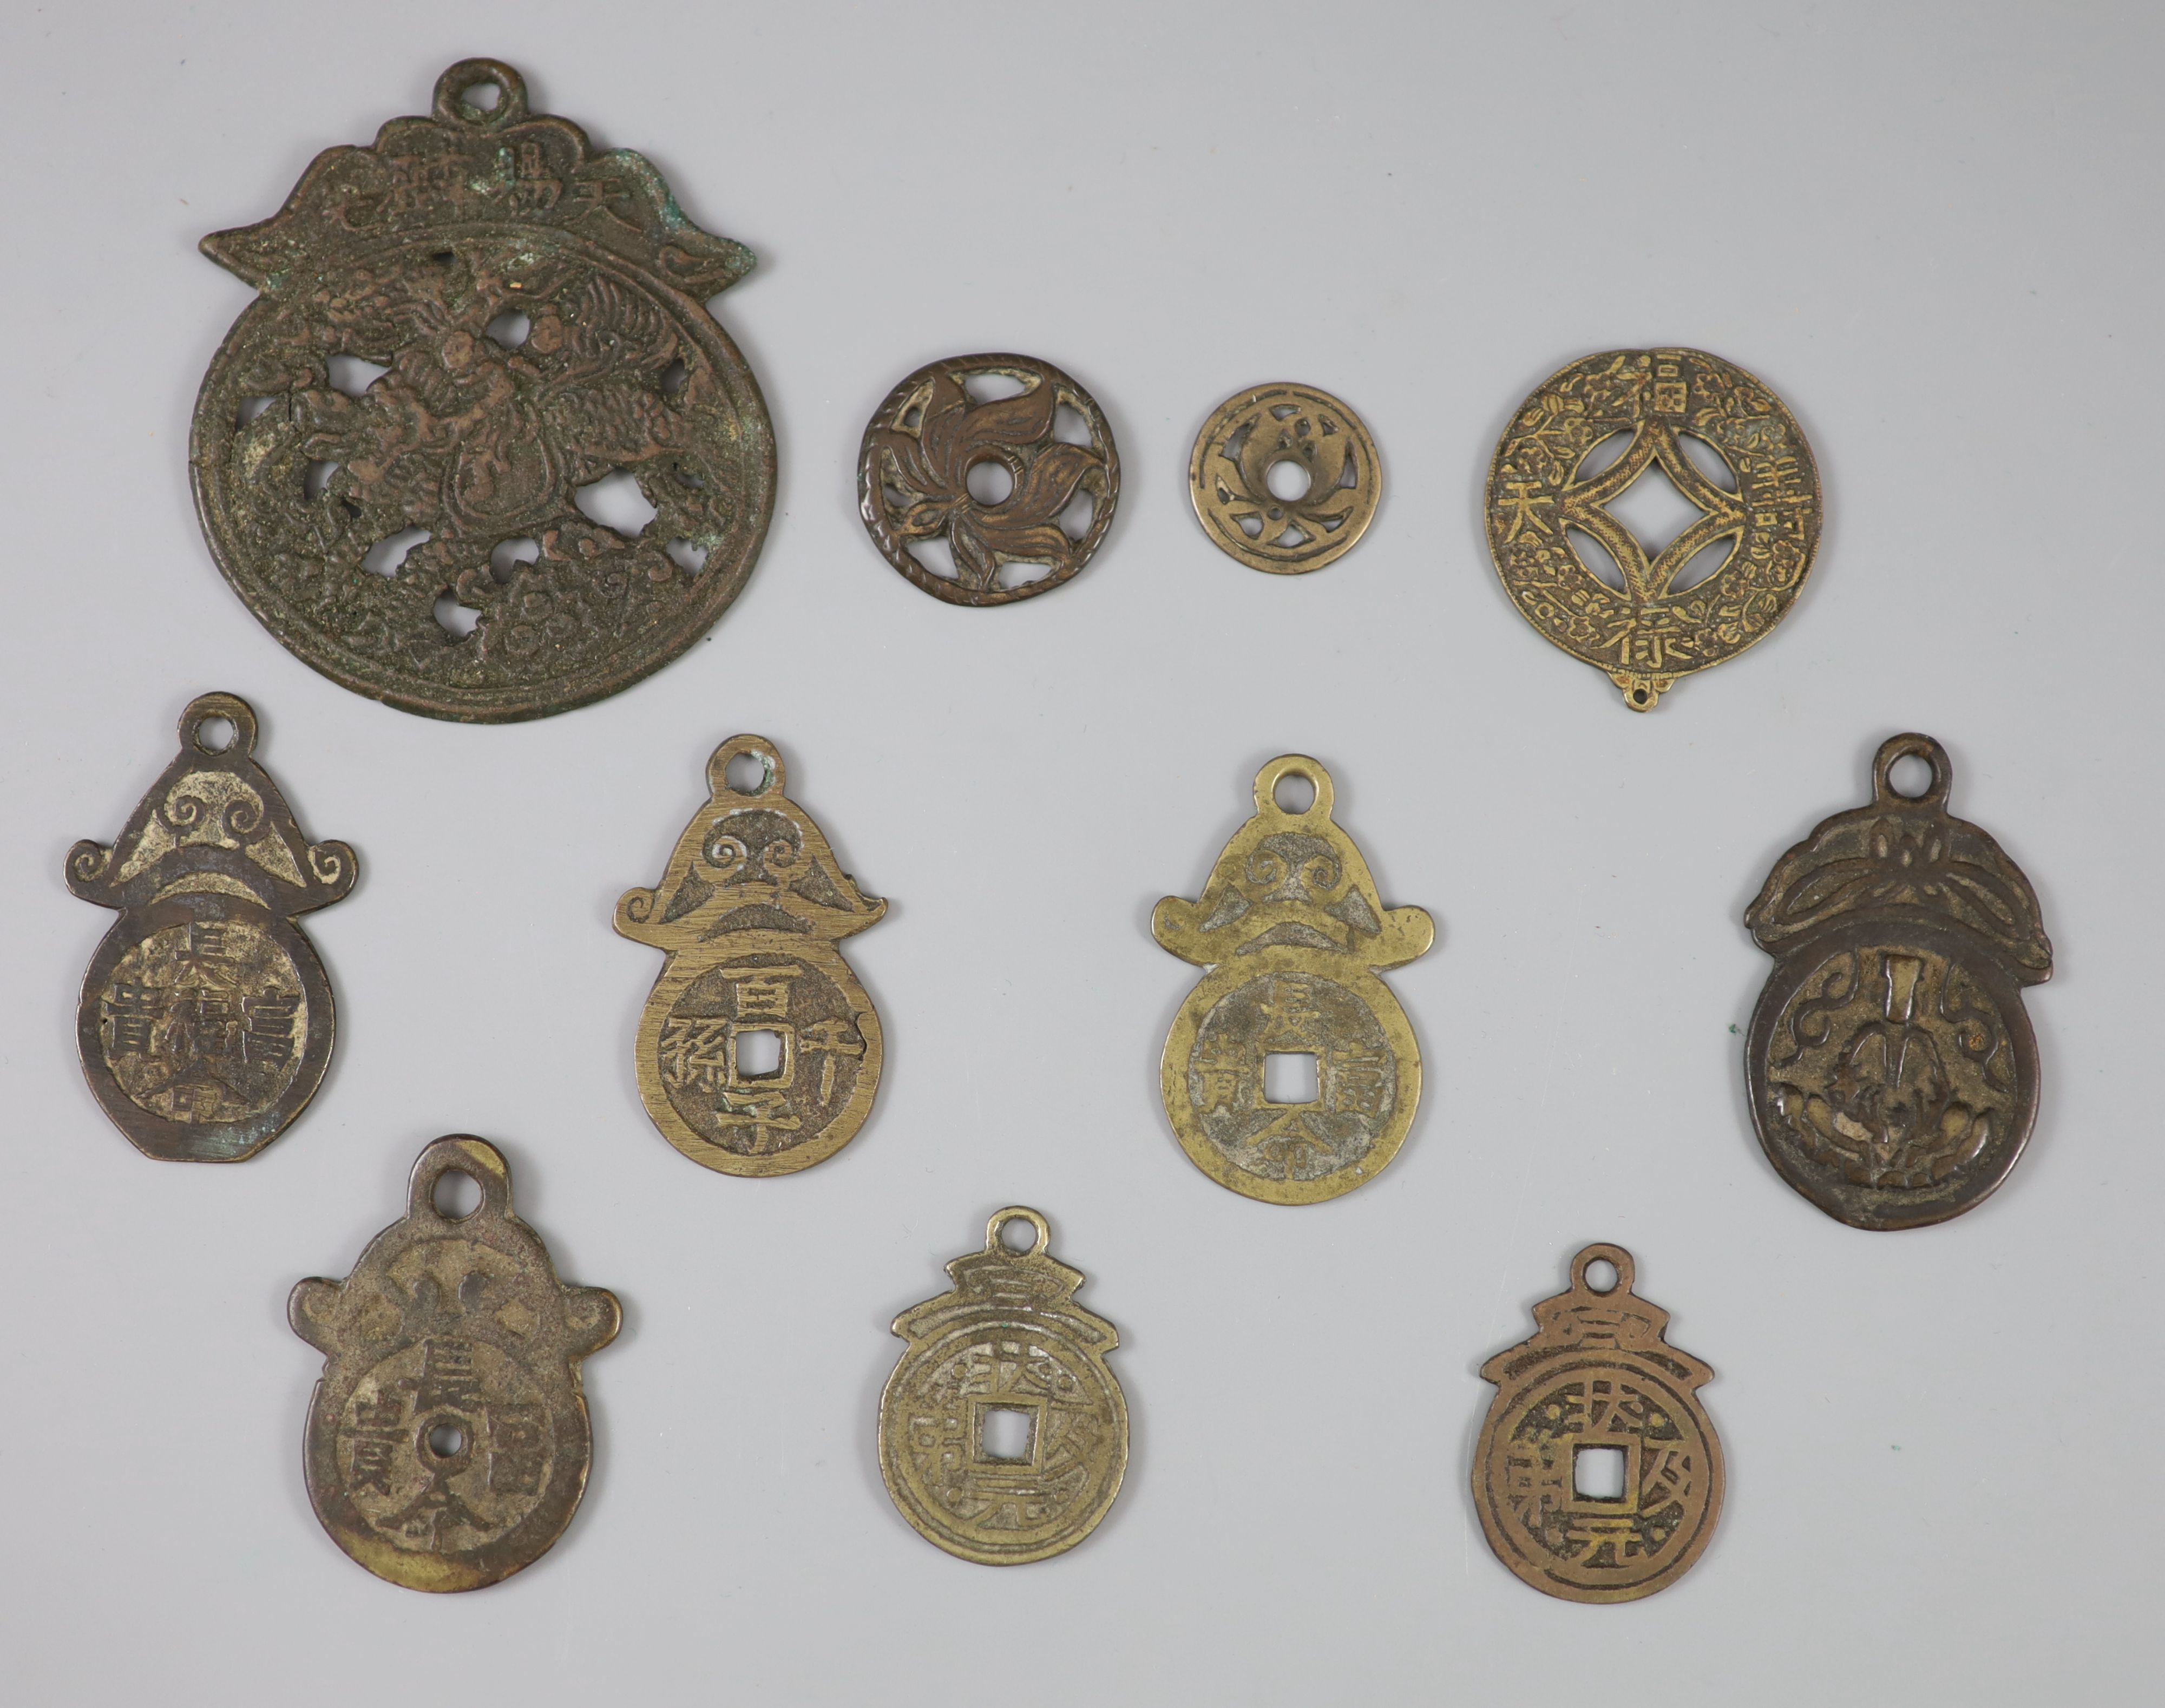 China, 11 bronze charms or amulets, Qing dynasty or earlier,